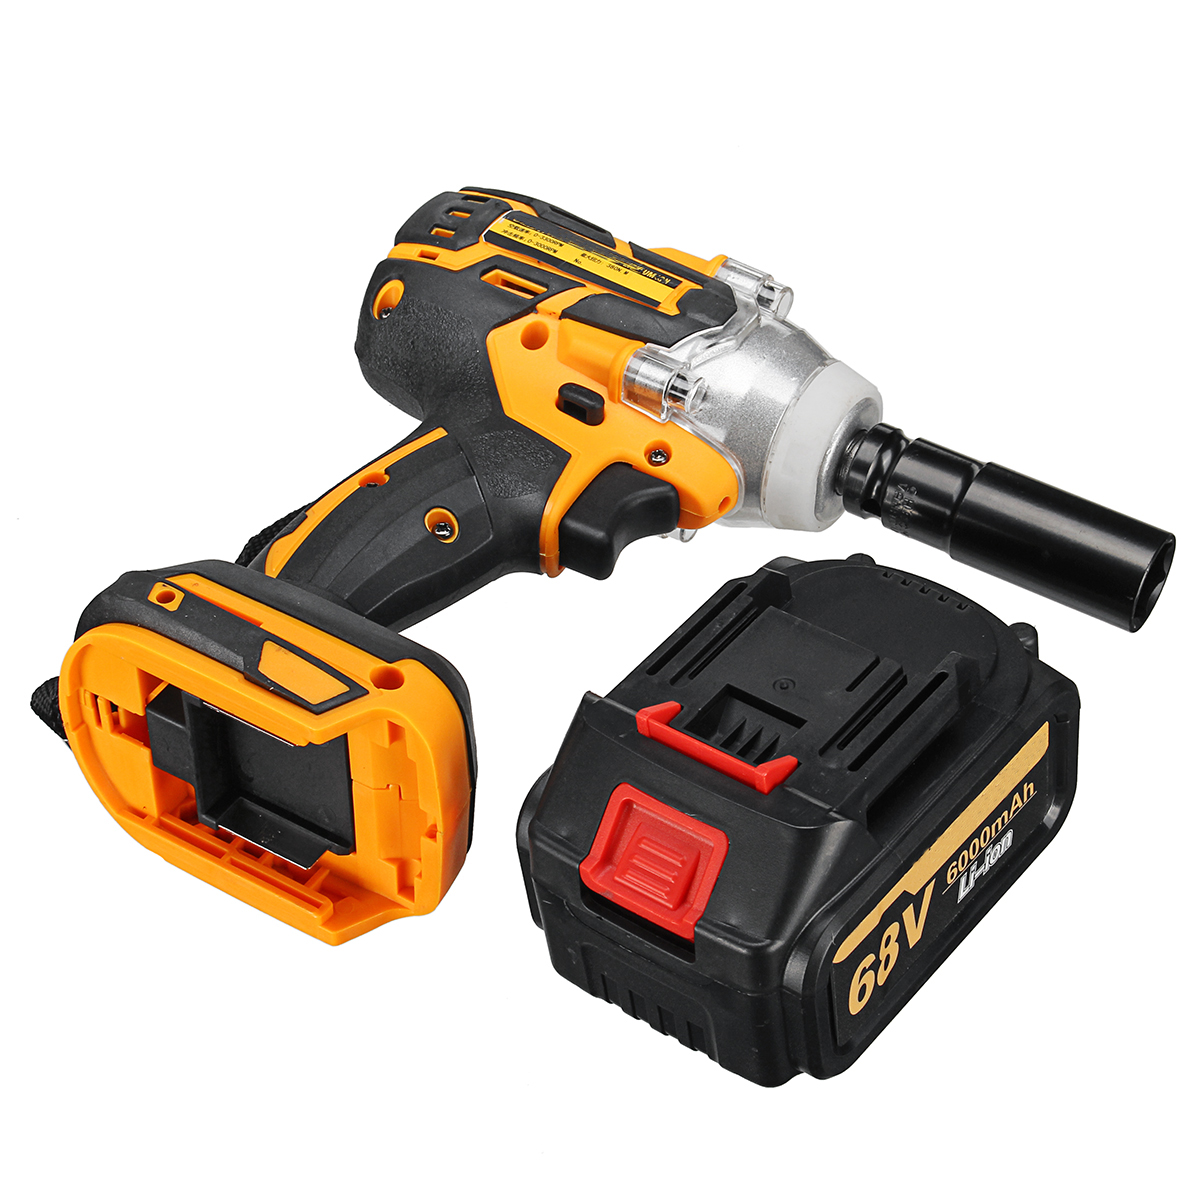 Drillpro-Electric-Wrench-Lithium-Ion-Brushless-Motor-Cordless-Impact-Wrench-2-Battries-1376318-4